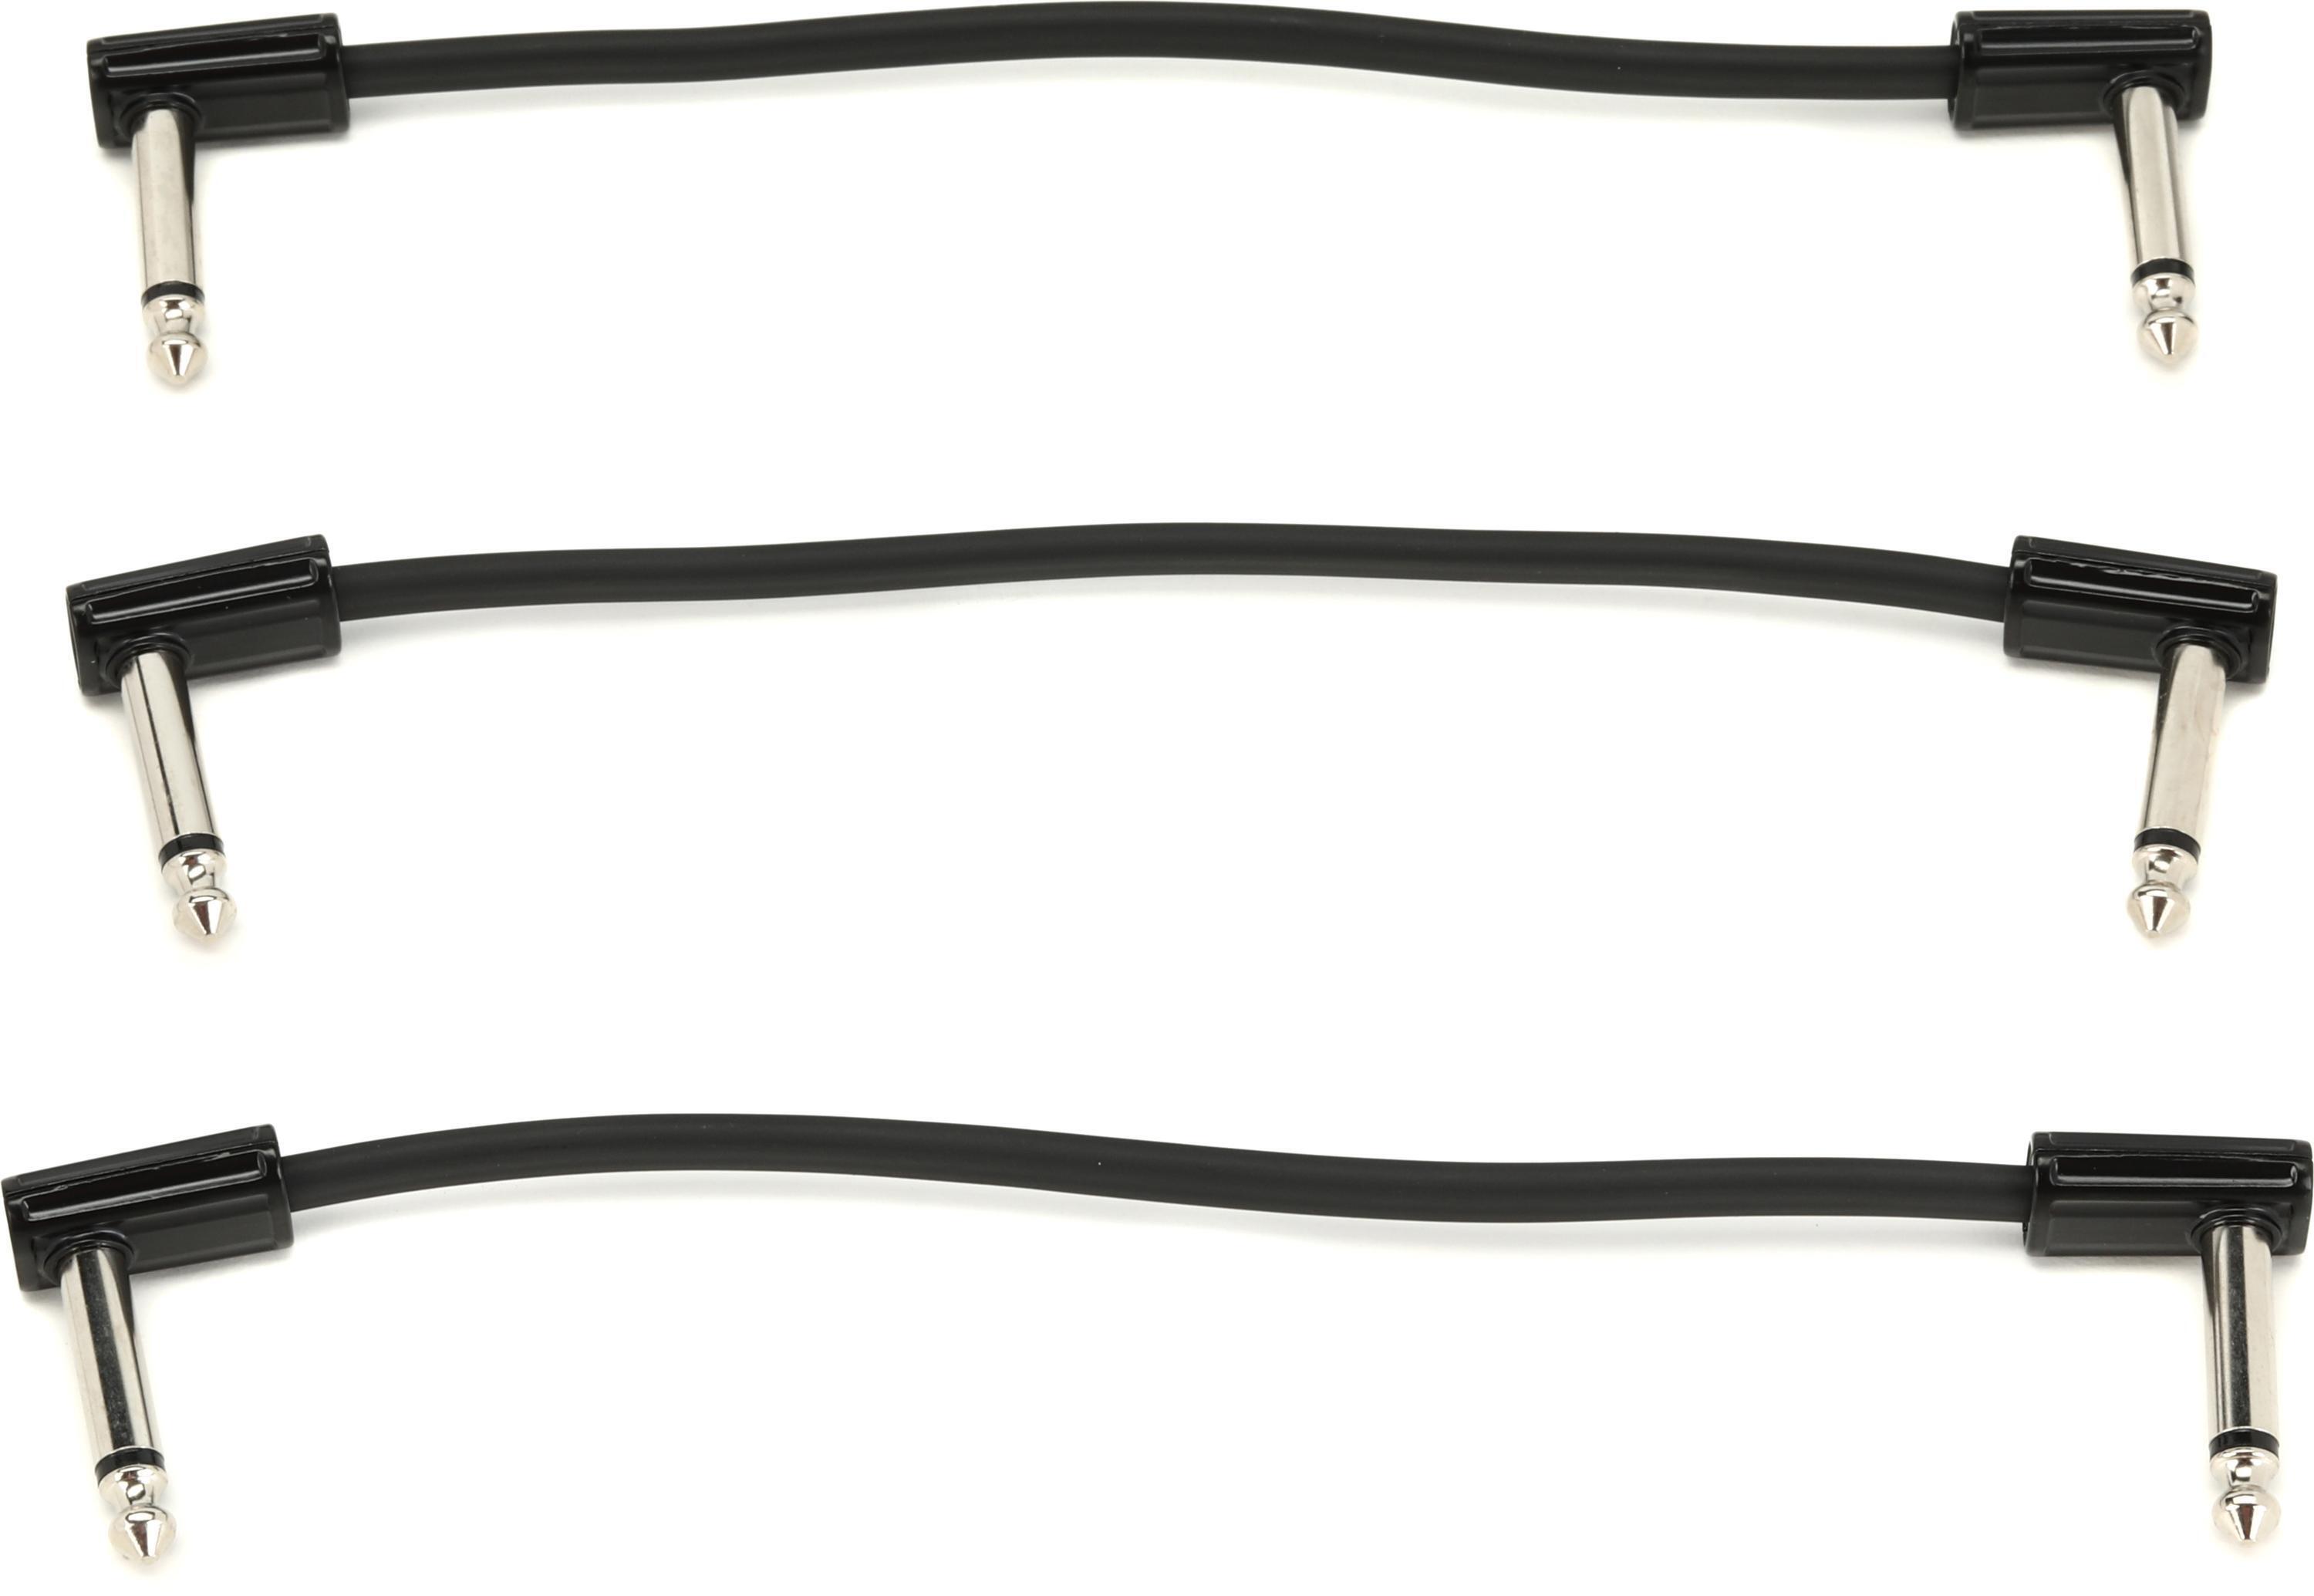 Bundled Item: MXR 3PDCPR06 6-inch Right Angle to Right Angle Ribbon Pedalboard Patch Cable (3-pack)